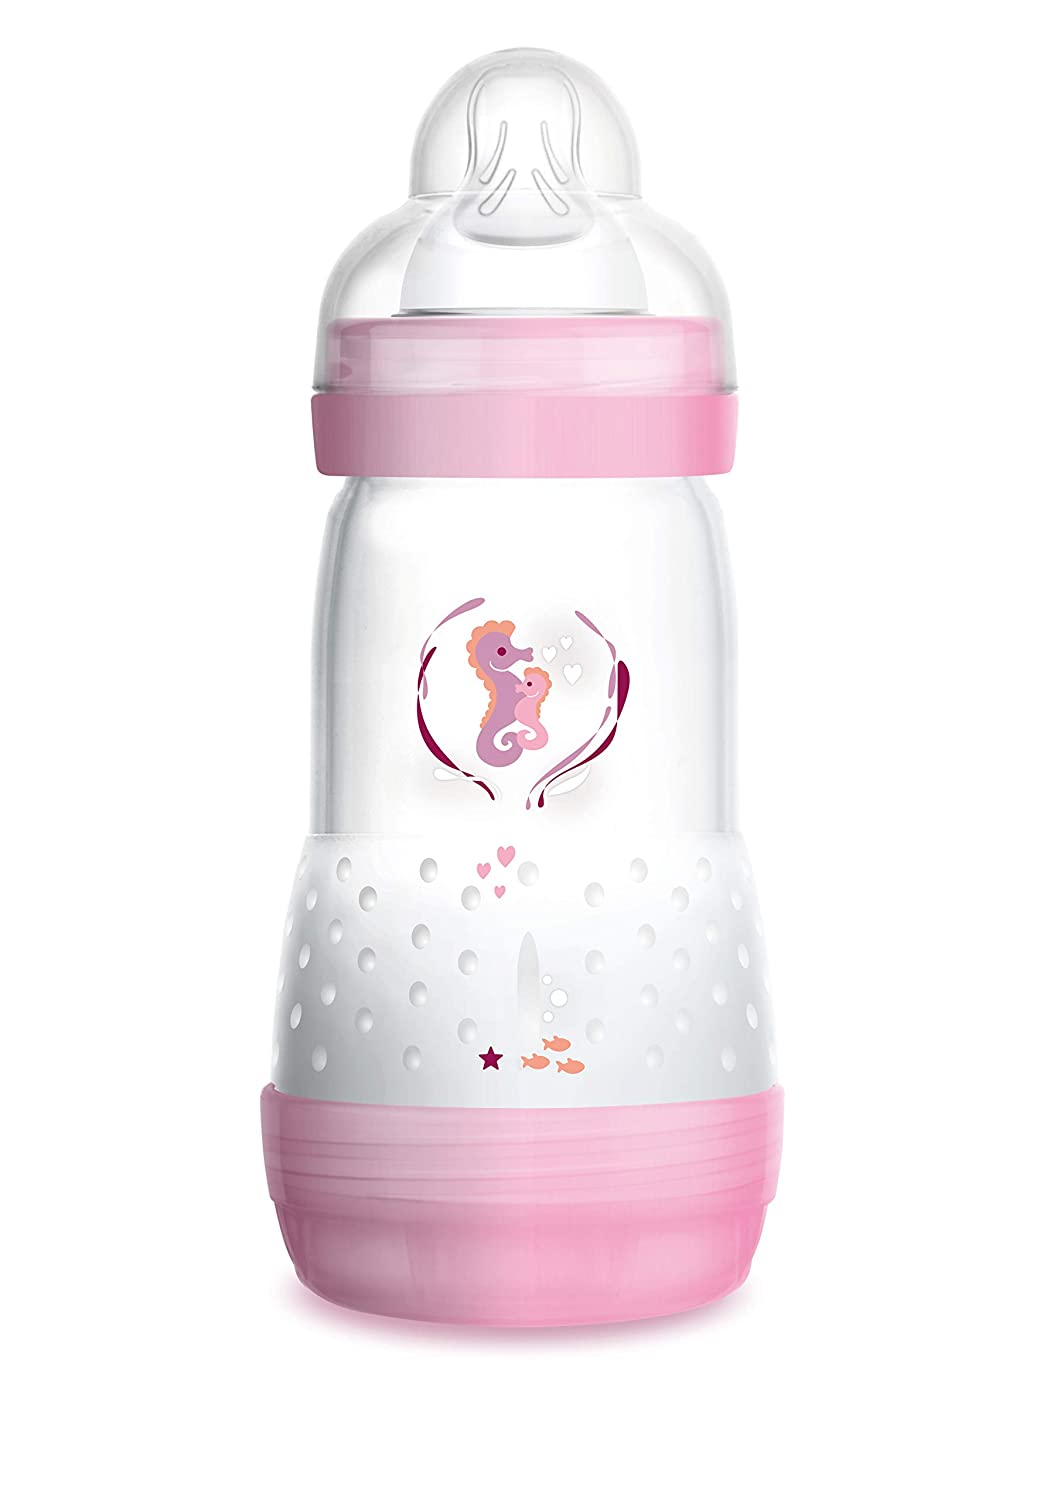 MAM Easy Start anti-colic baby bottle (260 ml), milk bottle with innovative base valve to prevent colic, baby’s drinking bottle with size 1 teat, from birth, seal